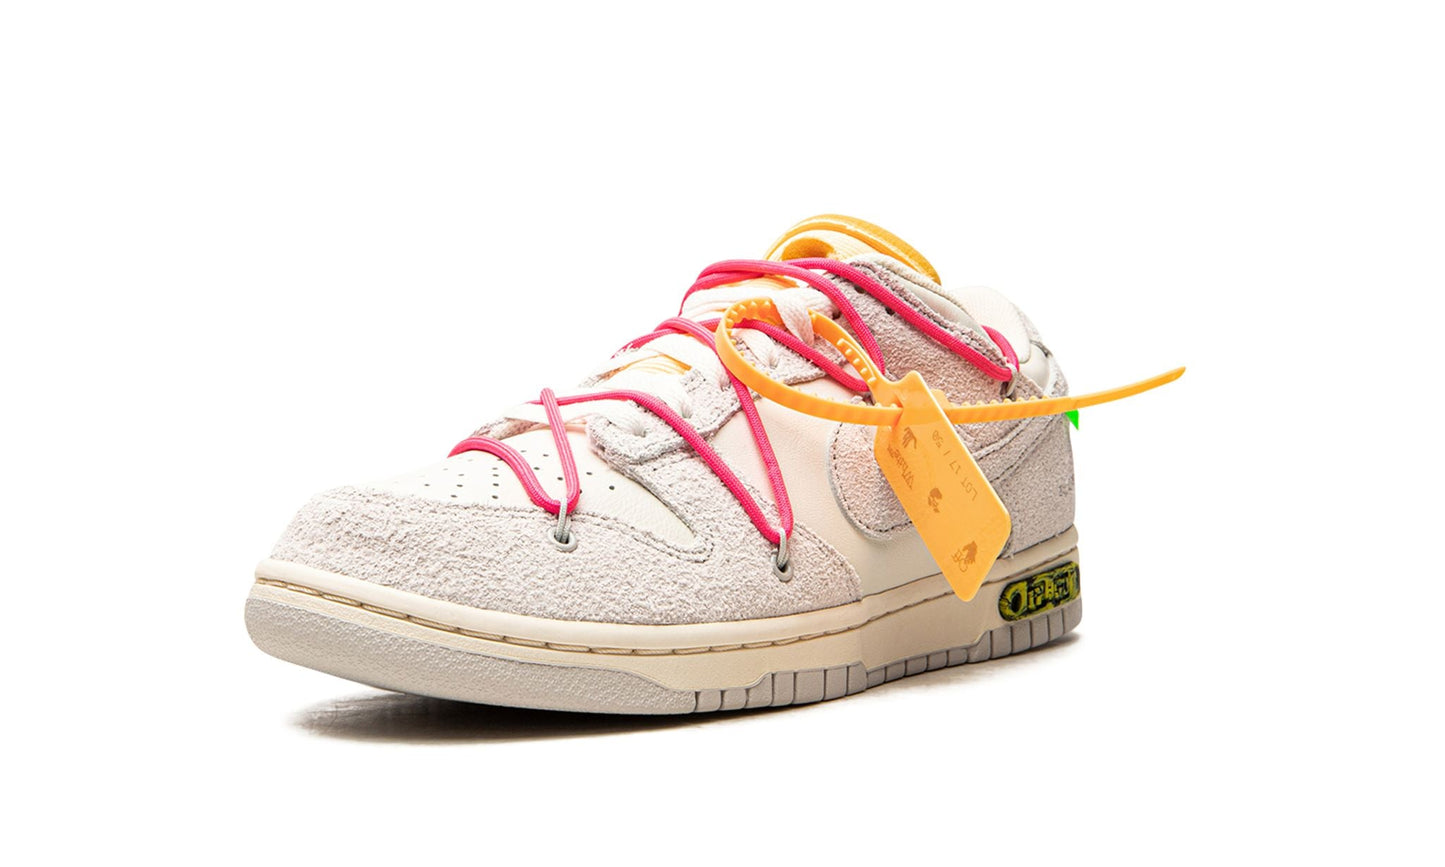 NIKE X OFF-WHITE DUNK LOW "Off White - Lot 17"